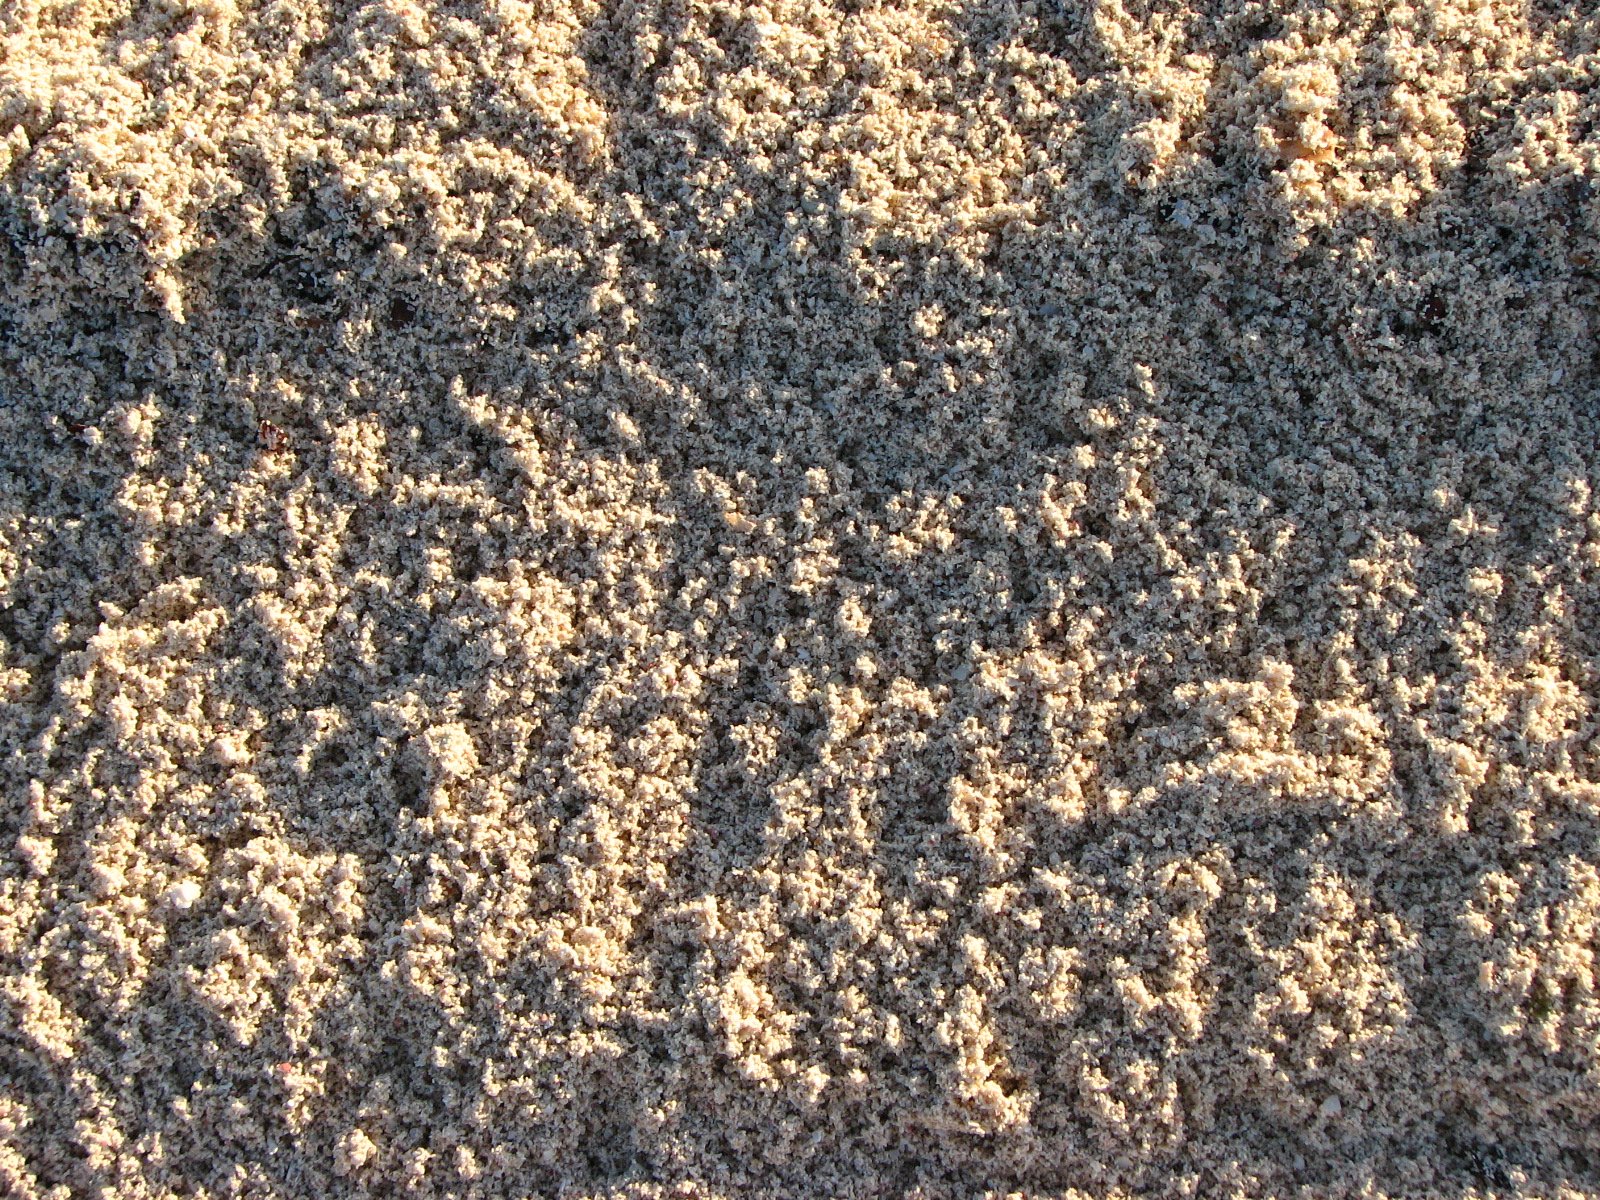 a black object on the ground and sand around